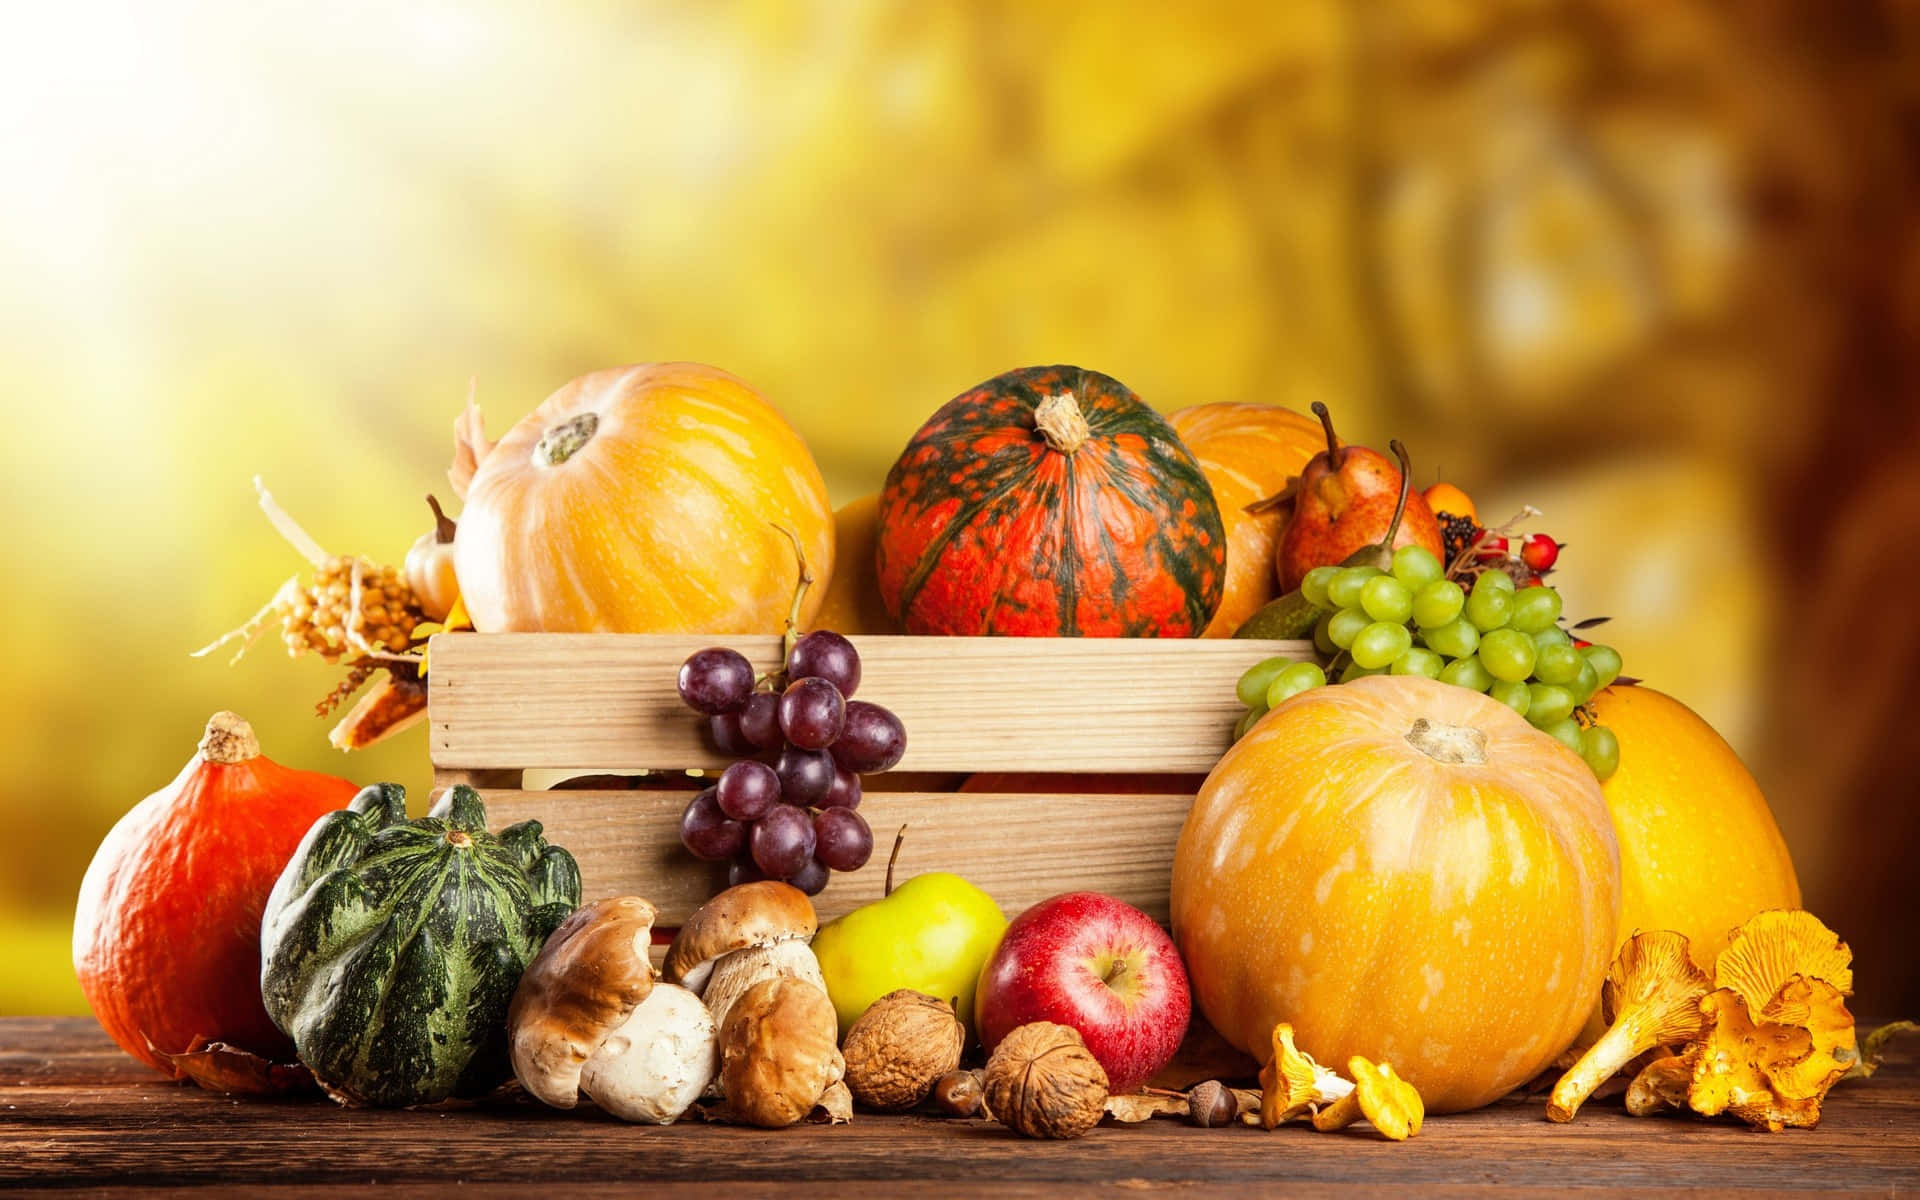 "An Autumn Feast - Splendidly warm and rustically colorful" Wallpaper